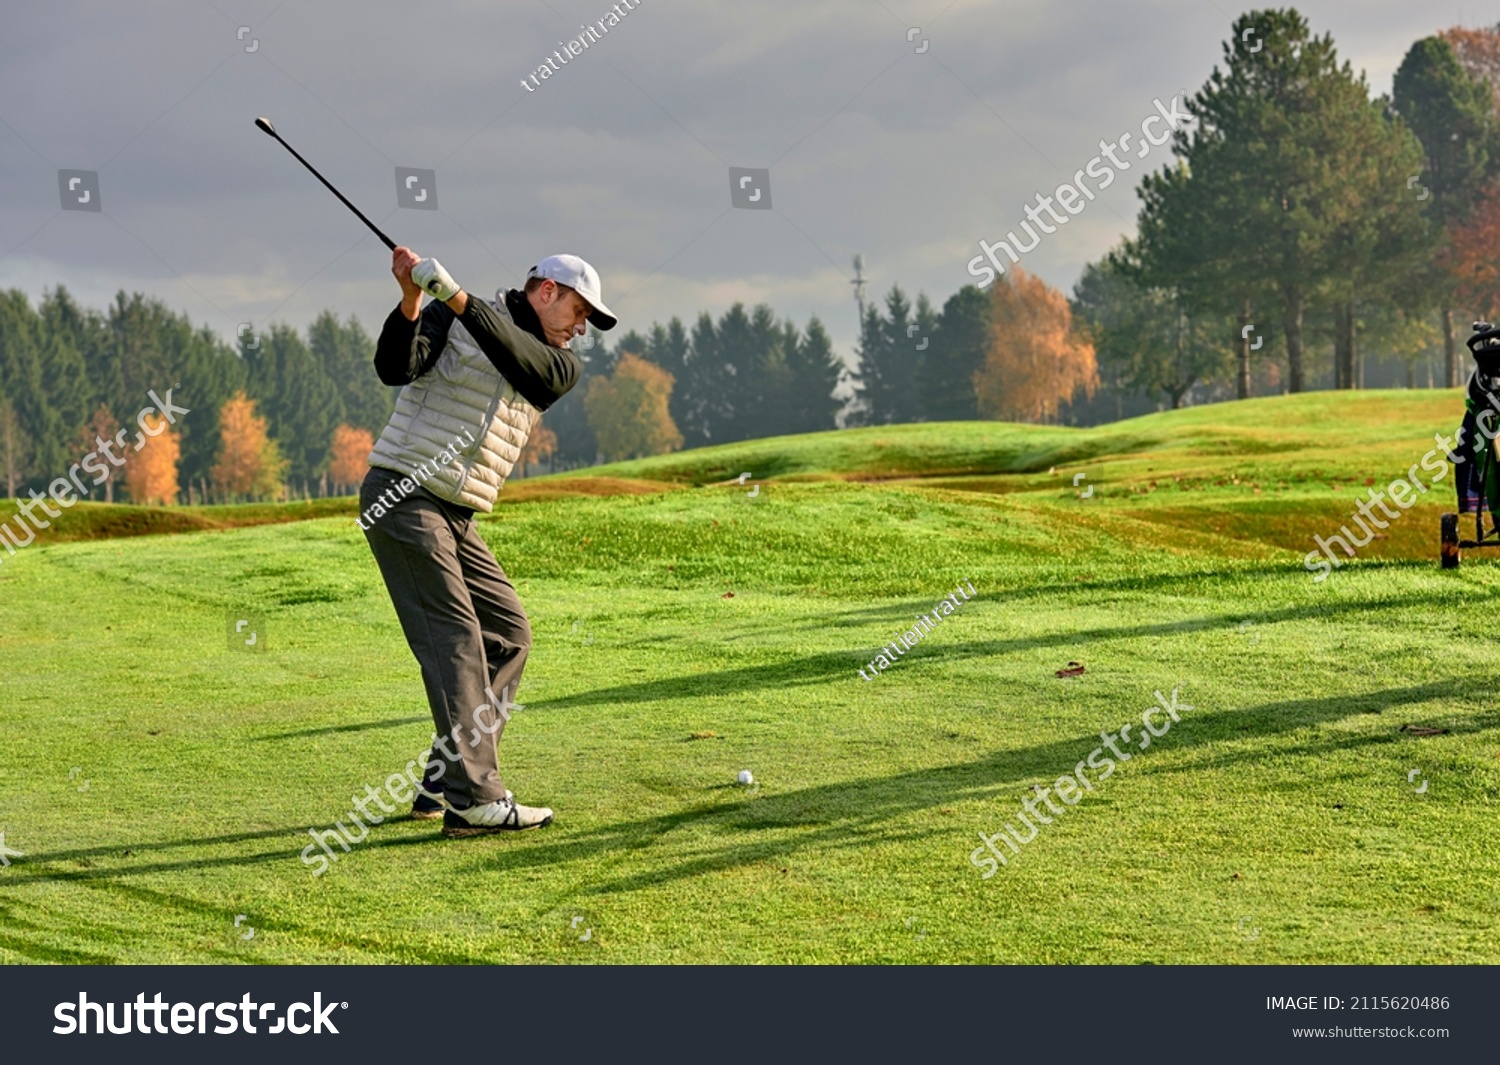 Golfer on a golf course in winter with wet grass, hitting the ball with a golf club. #2115620486